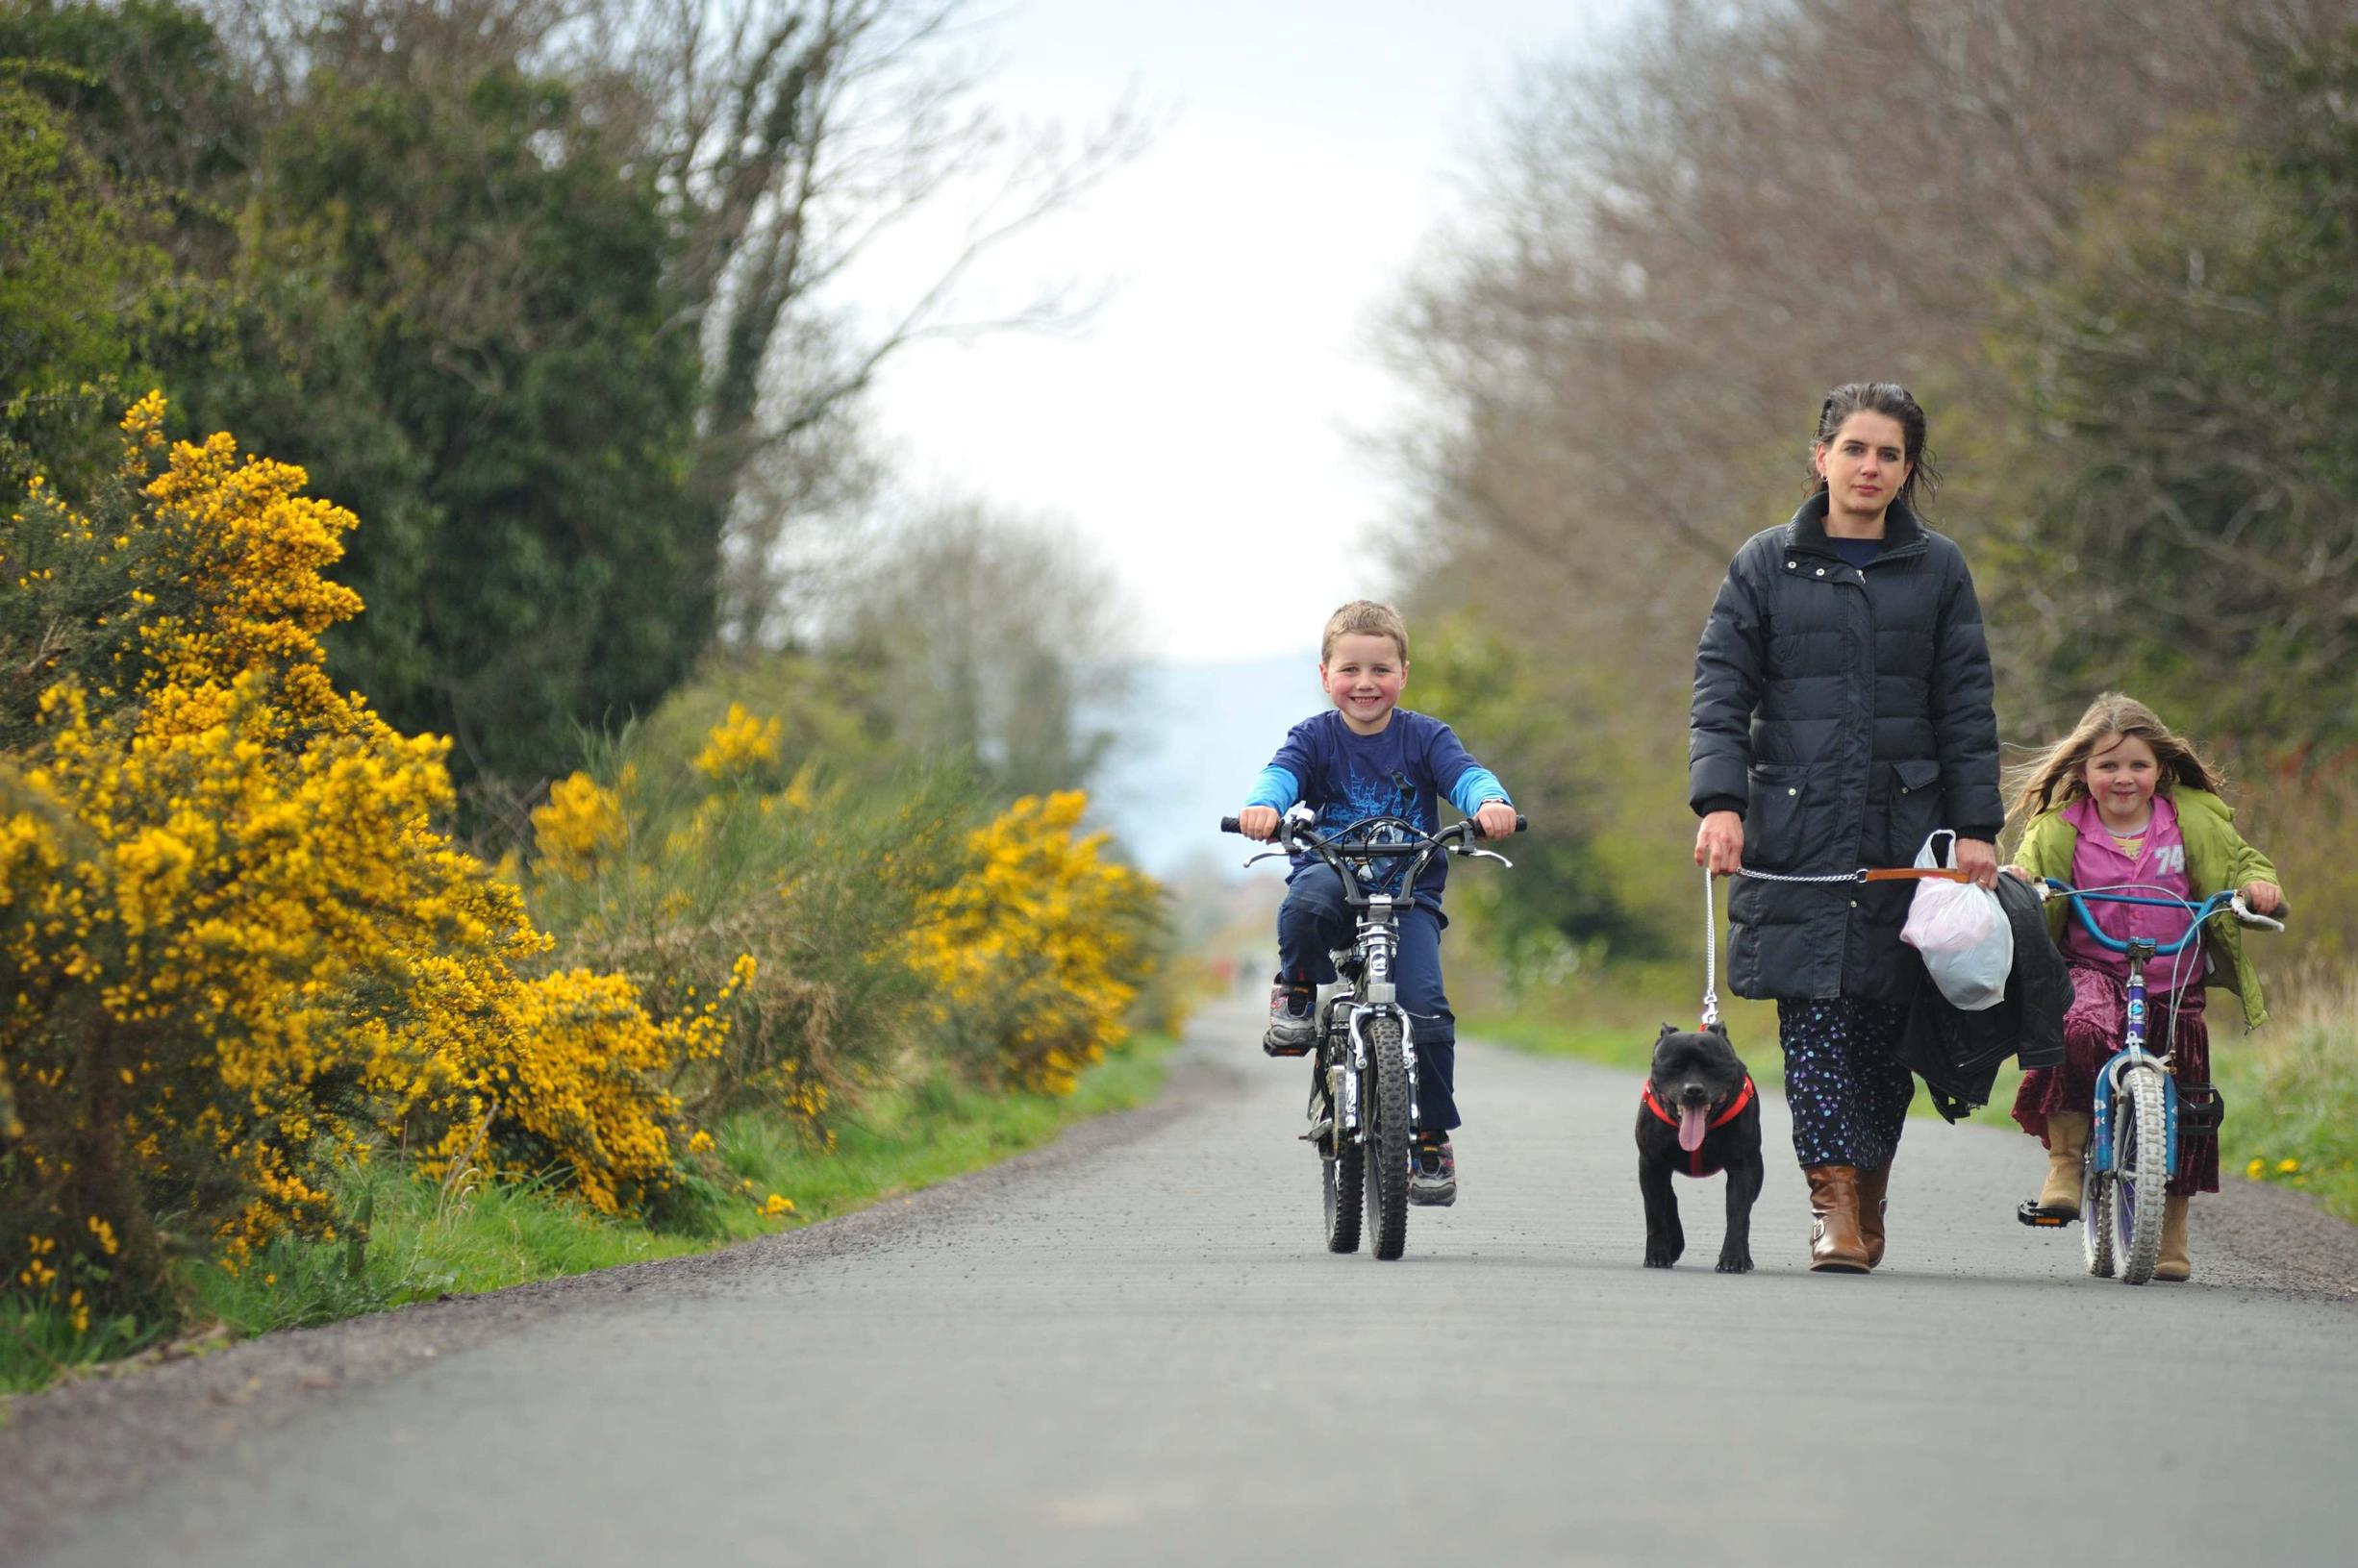 Improvements to the Comber Greenway in Belfast include widening the most used sections and secure cycle parking shelters to encourage ‘park and cycle’ options